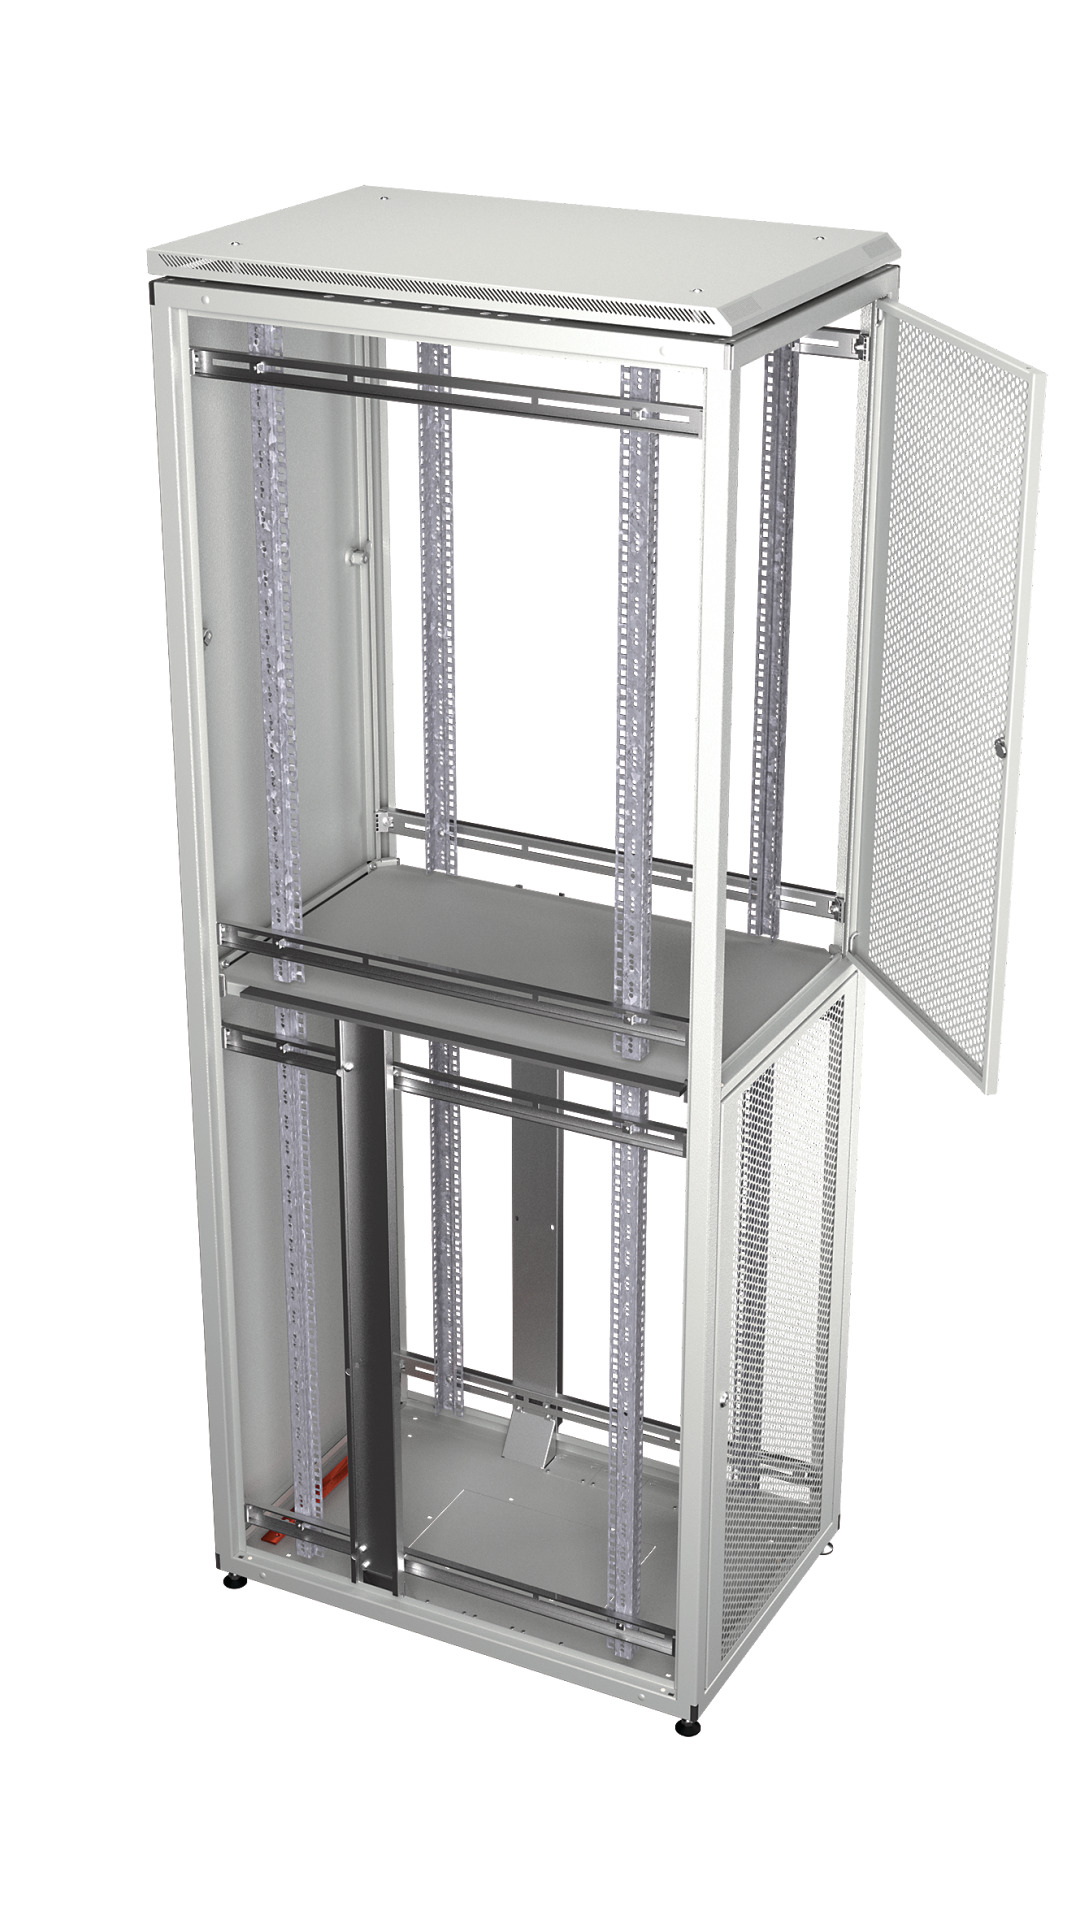 Co-Location Rack PRO, 1 x 42HE, 600x1200 mm, F+R 1-tlg. perforiert, RAL9005